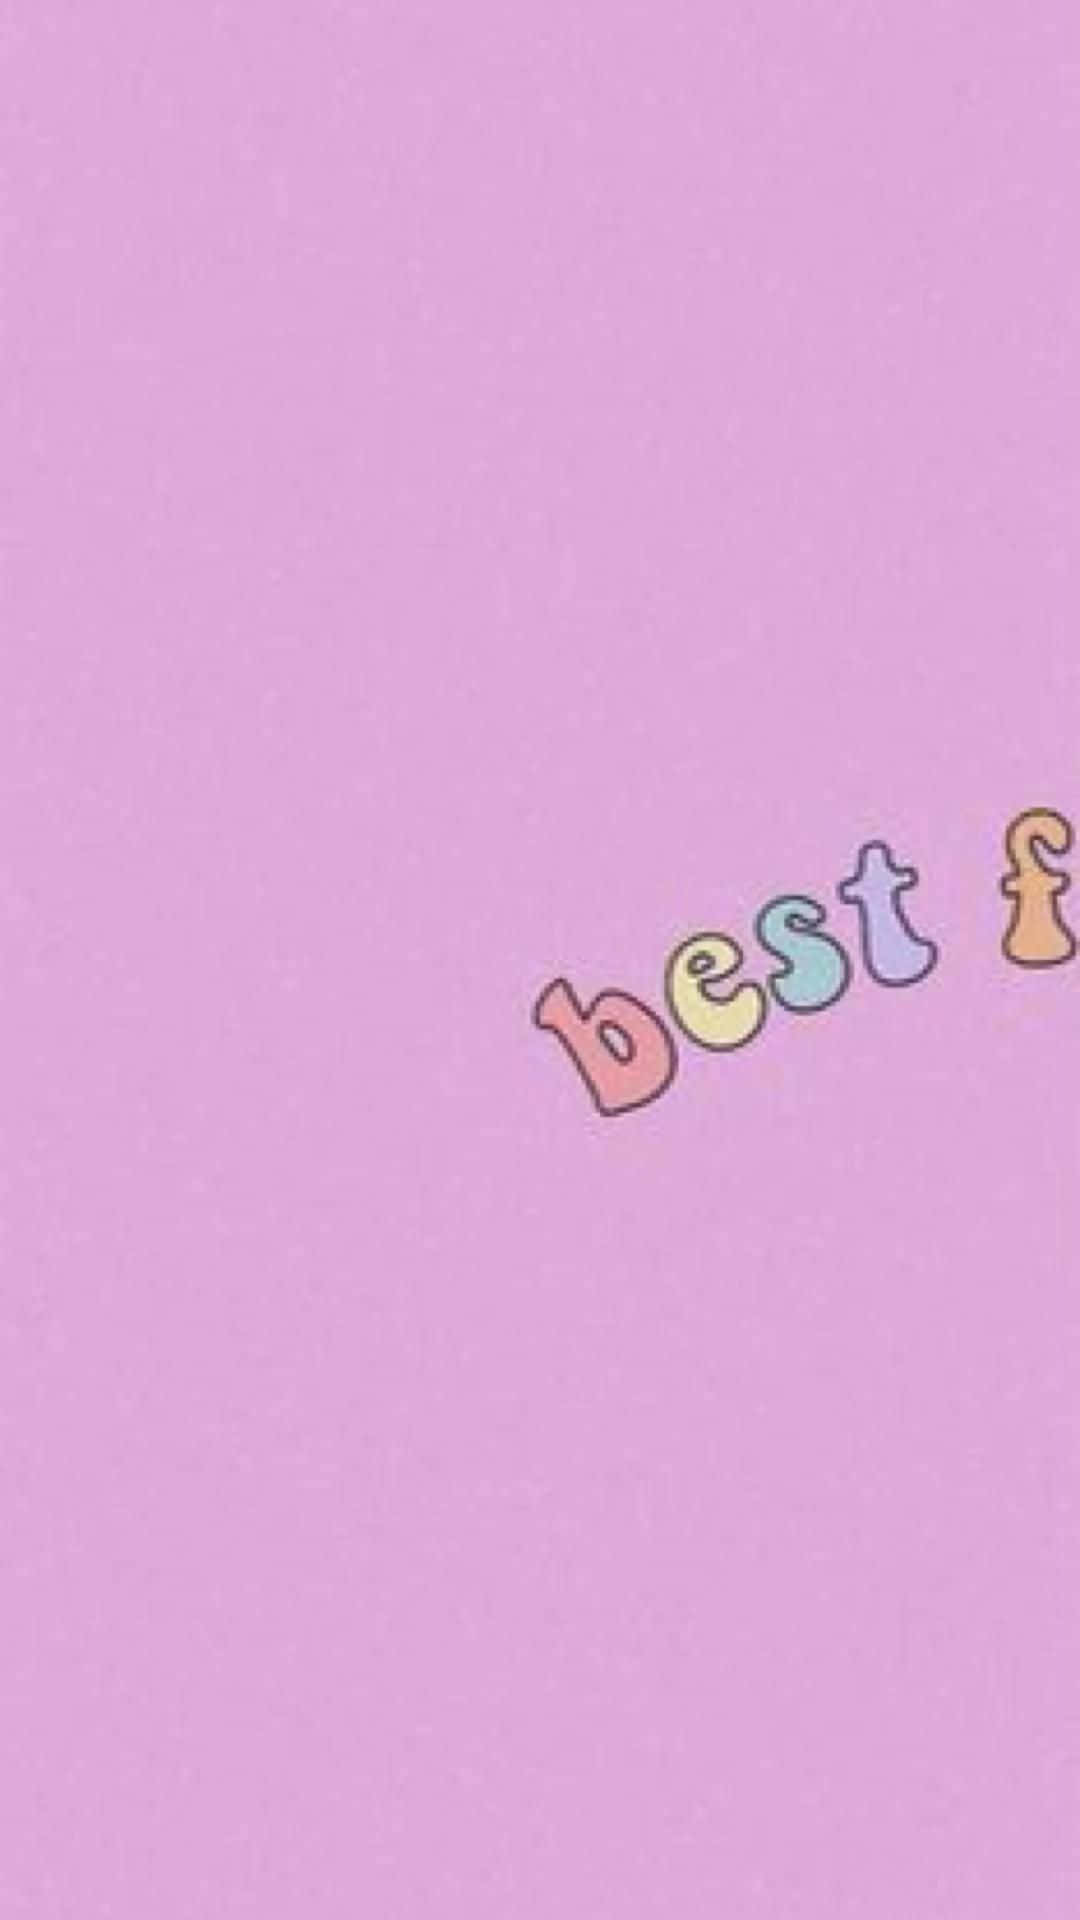 Download A Pink Background With The Word Best Friend Written On It ...